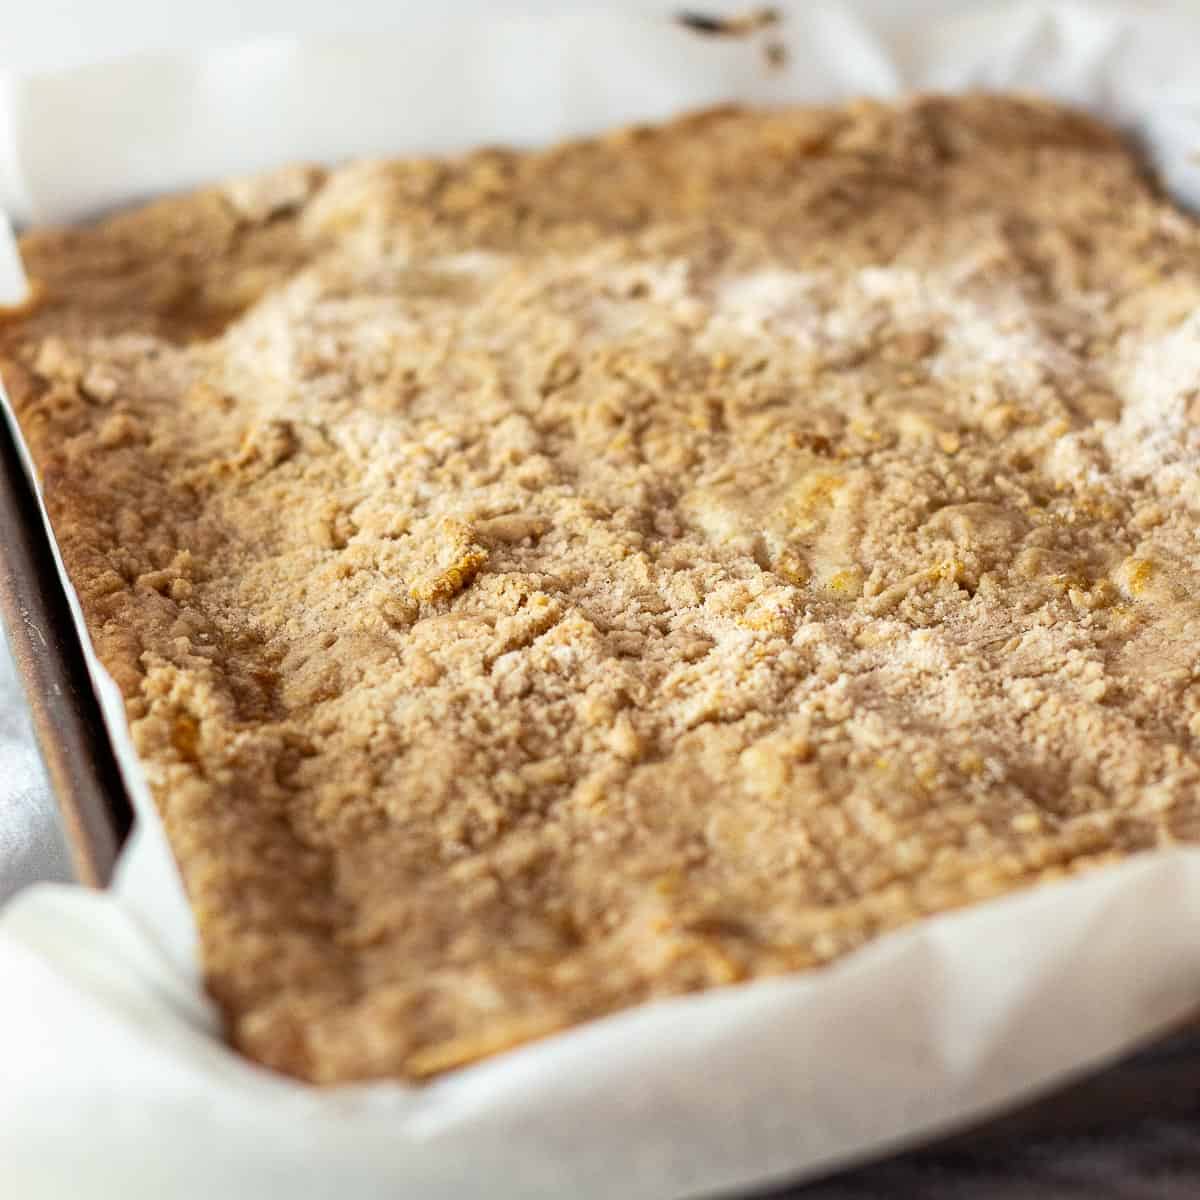 Image showing a full baked pan of Pumpkin Squares Recipe.